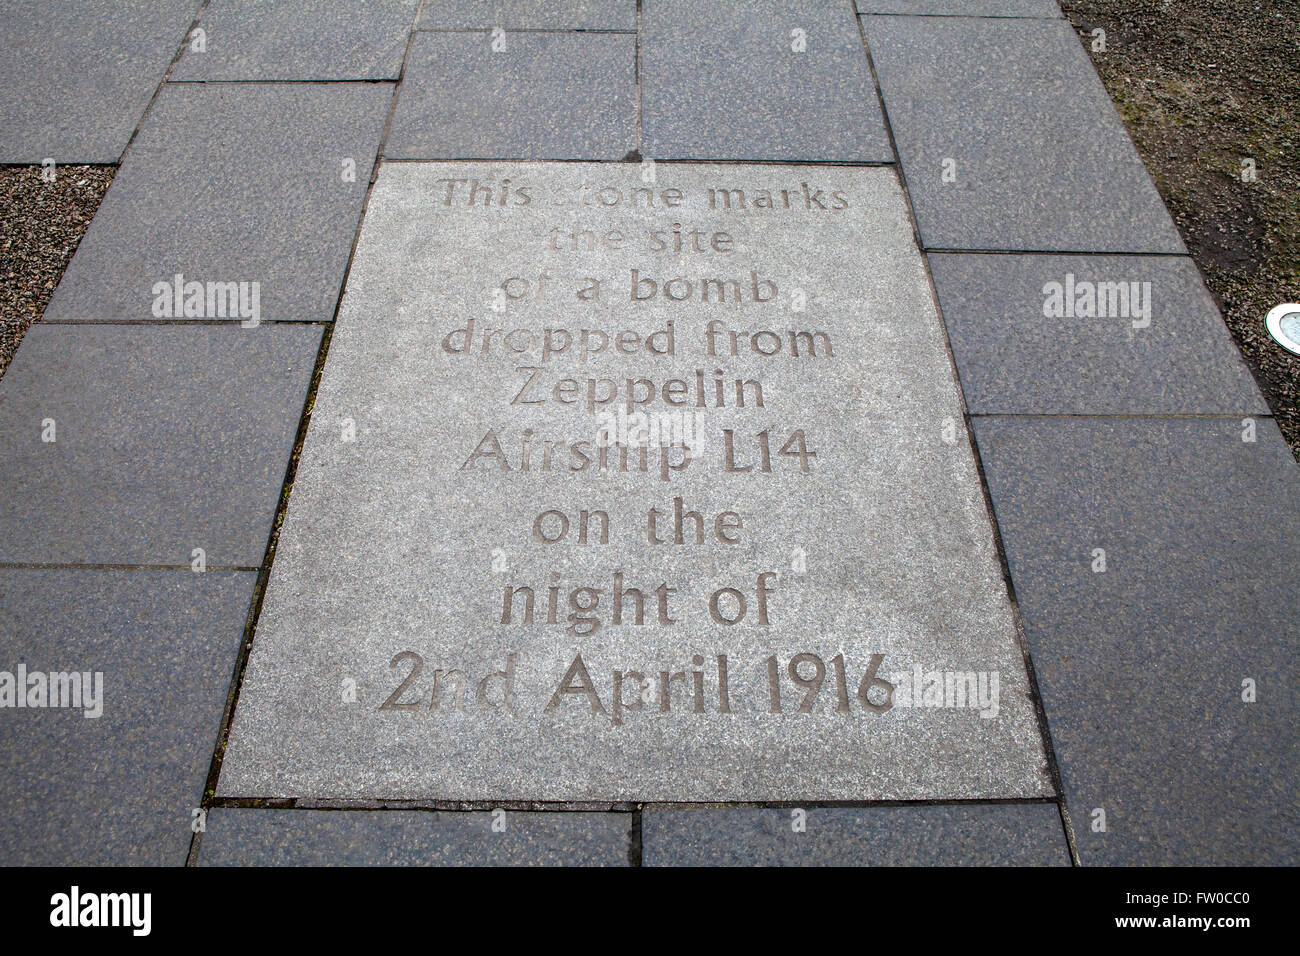 A plaque on the ground in Grassmarket noting the site where a bomb was dropped from a Zeppelin Airship during the first world wa Stock Photo